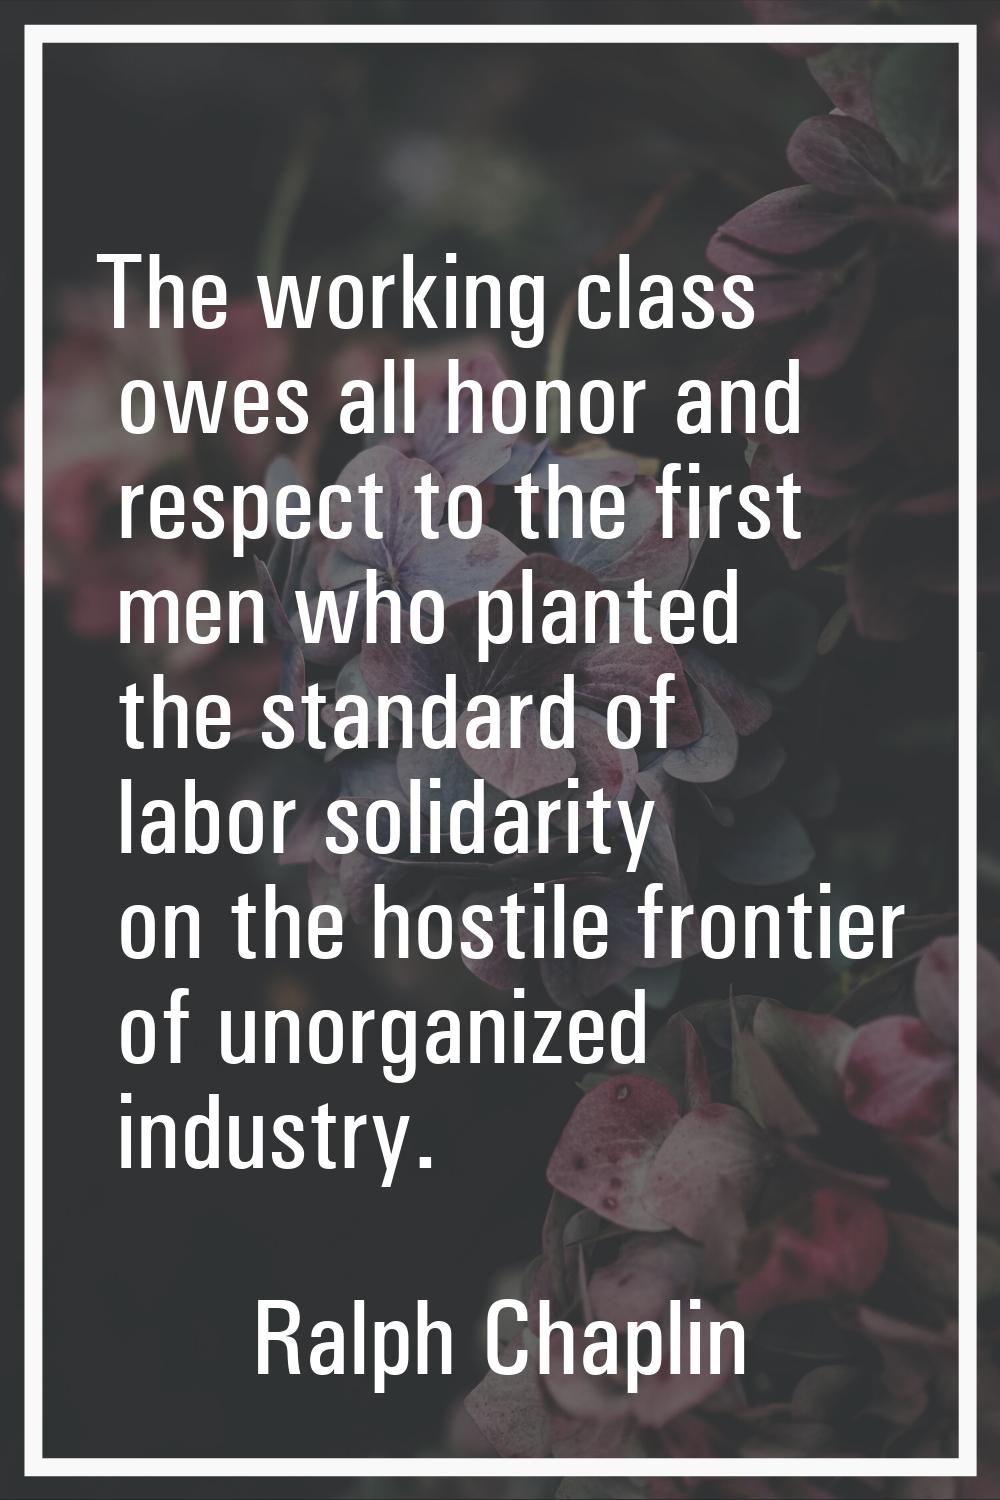 The working class owes all honor and respect to the first men who planted the standard of labor sol